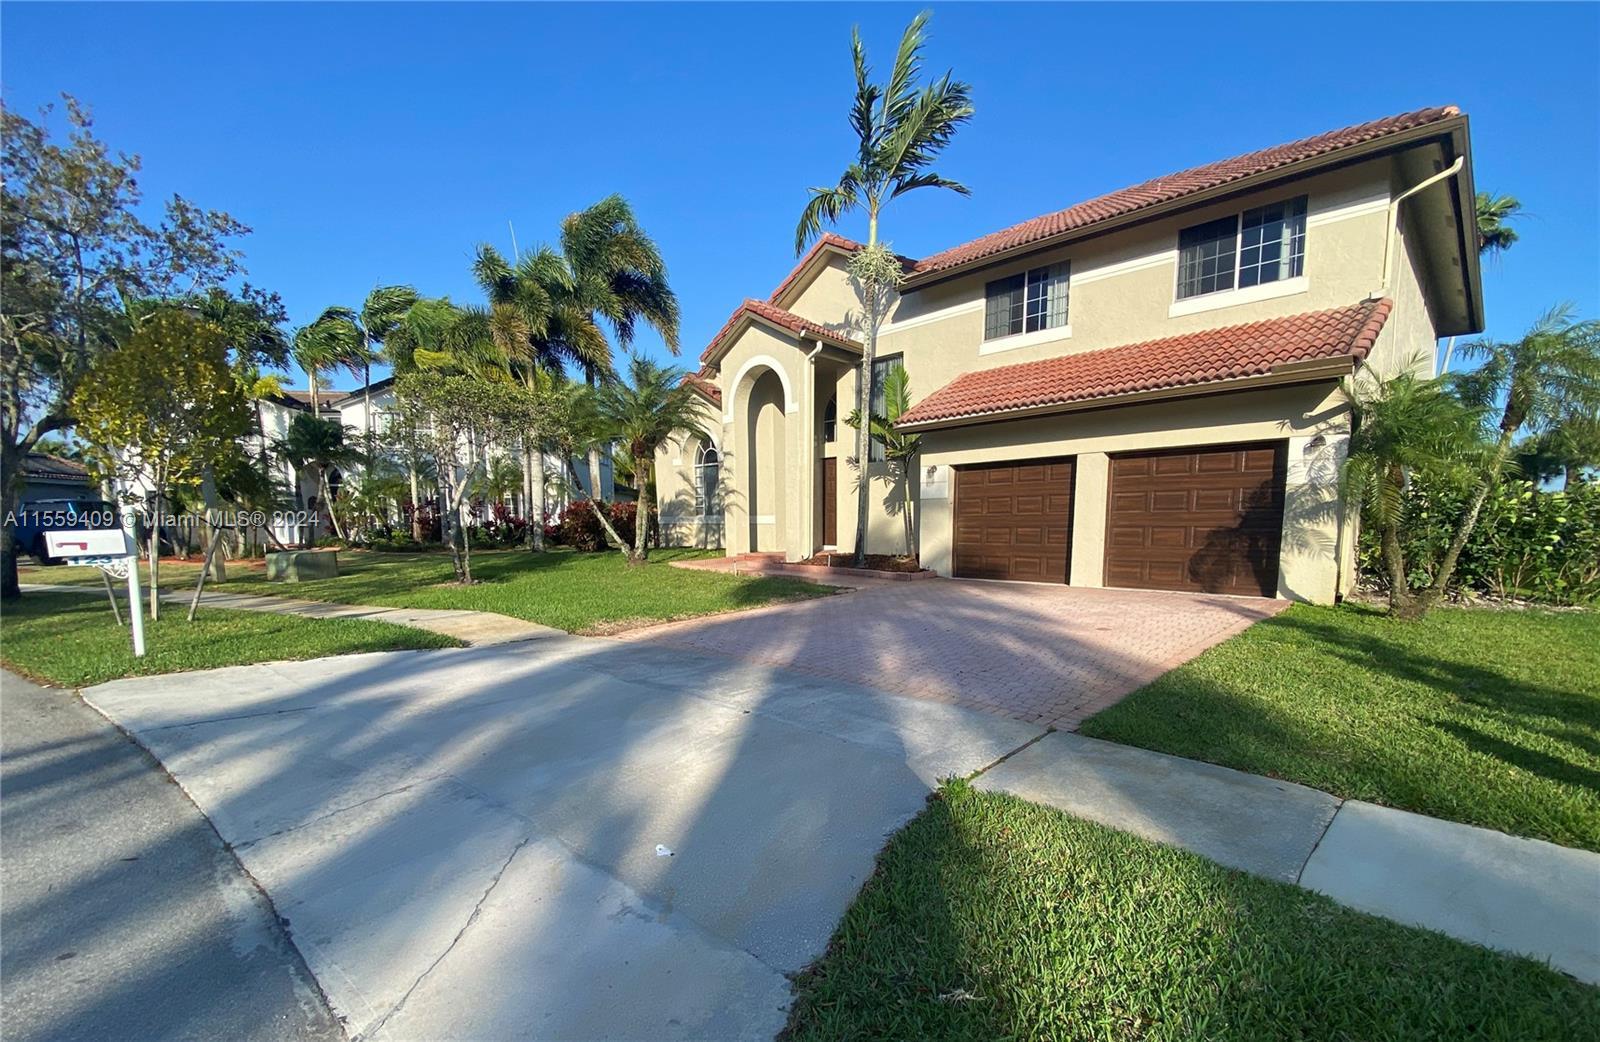 Photo of 1231 NW 179th Ave in Pembroke Pines, FL